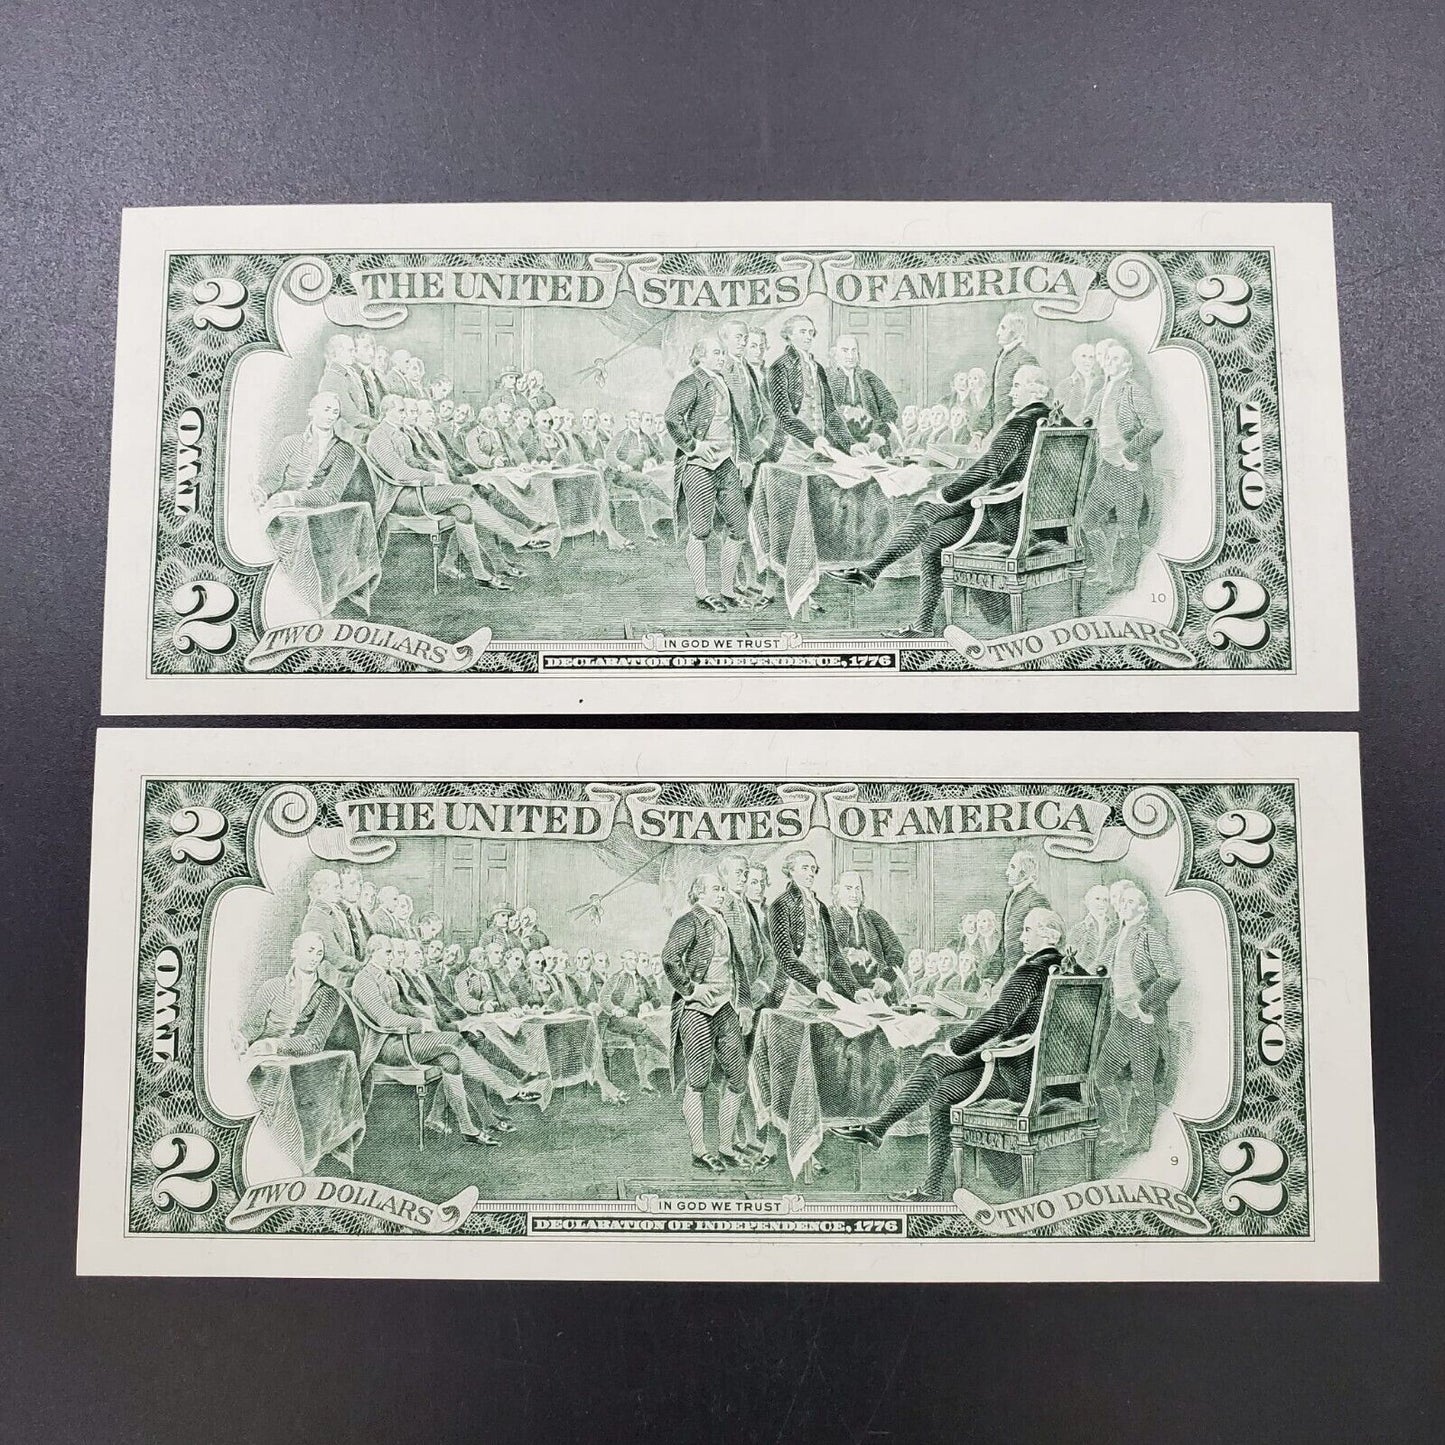 2 CONSECUTIVE 1995 $2 FRN FEDERAL RESERVE NOTE CH UNC #1